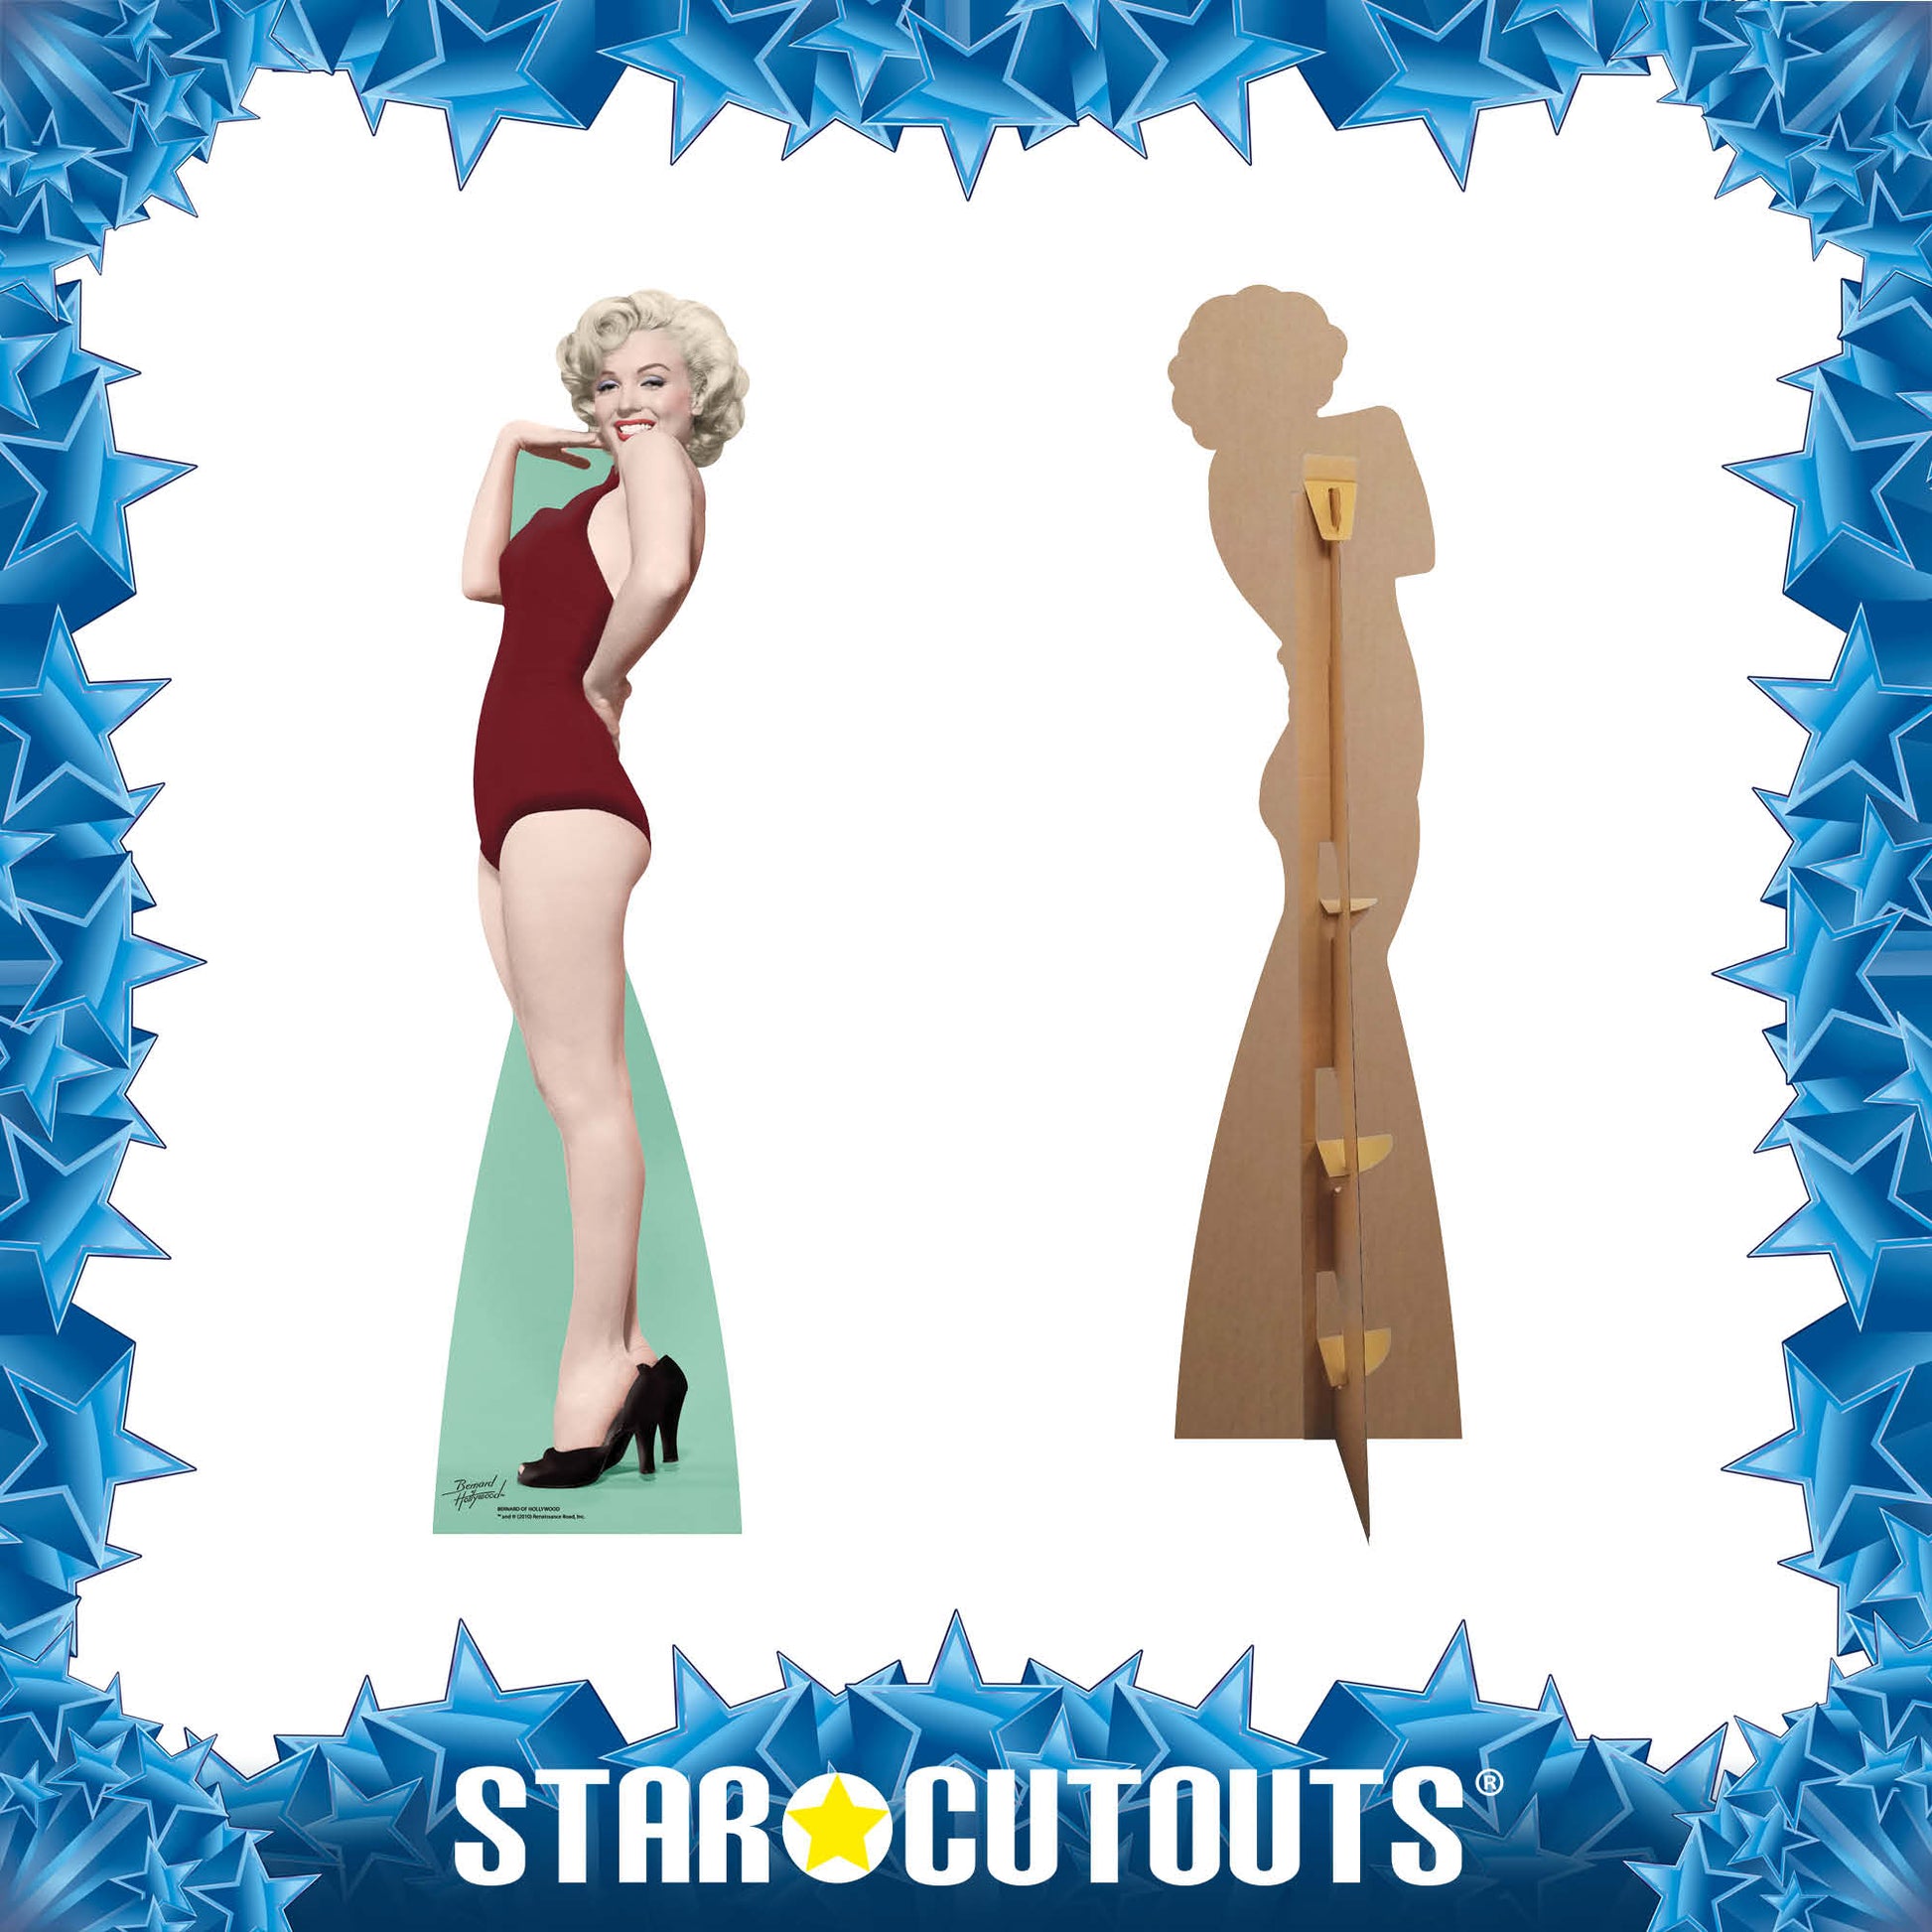 Marilyn Monroe Red Swim Suit Cardboard Cut Out Height 175cm - Star Cutouts